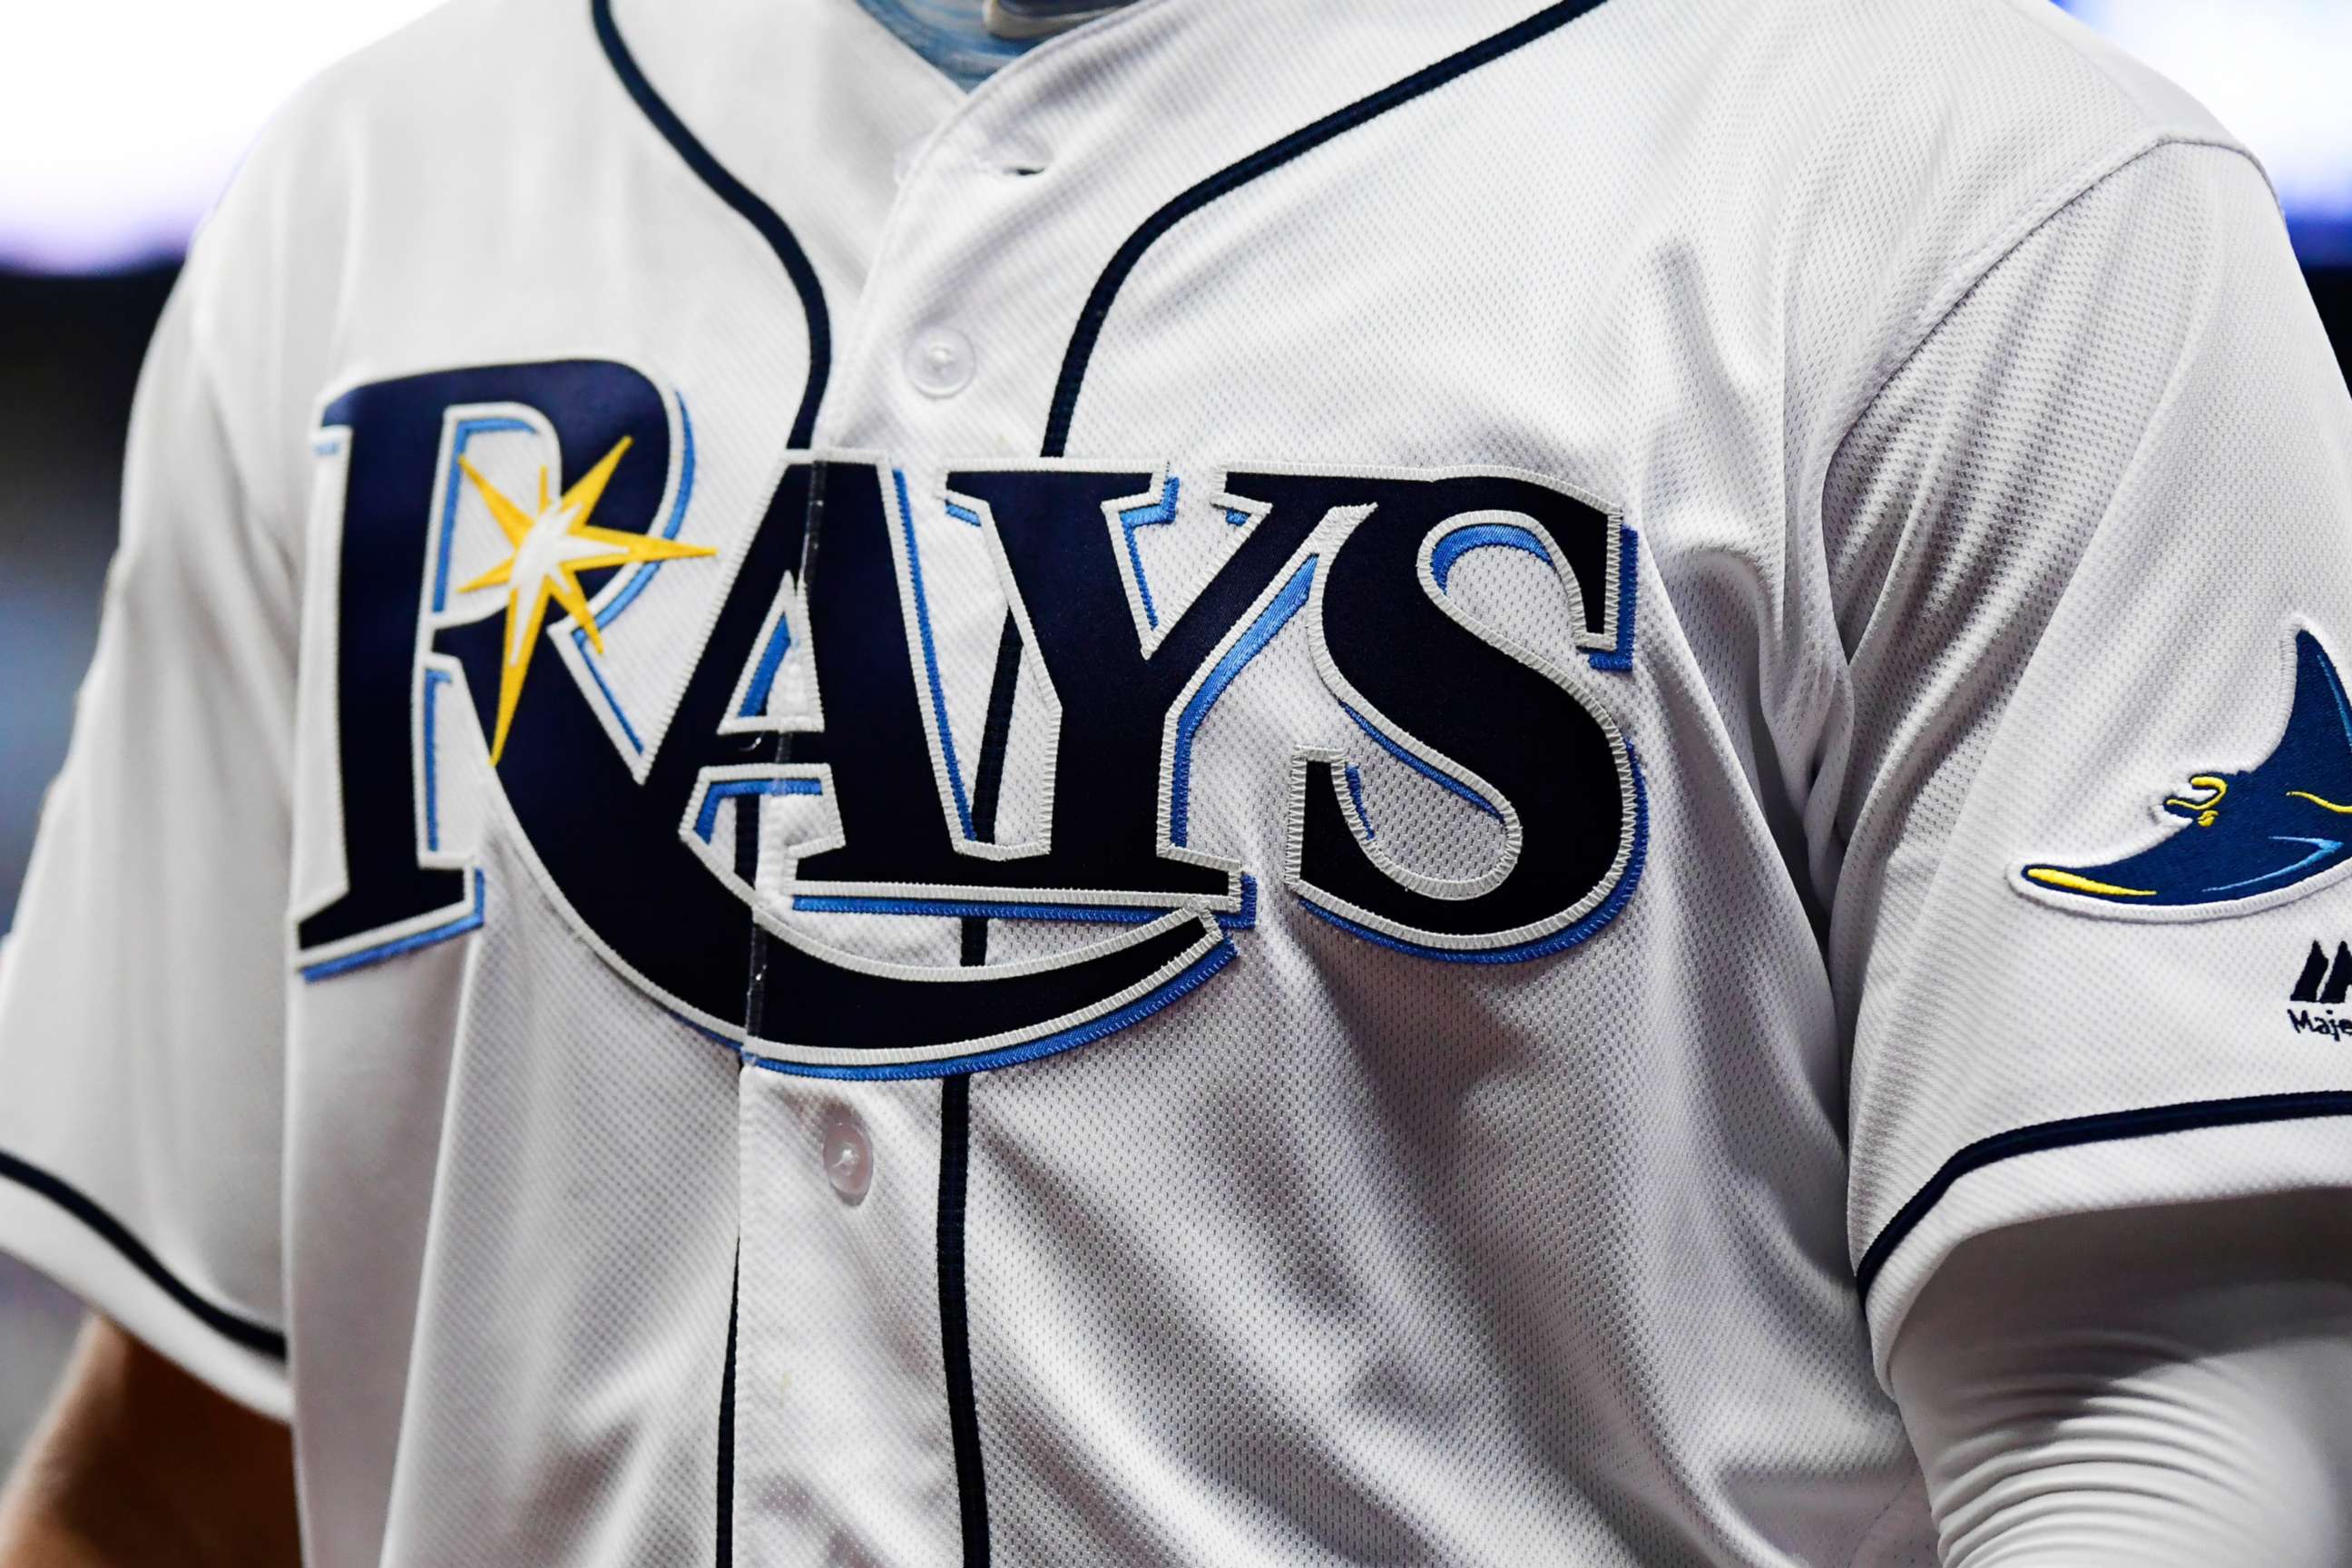 PHOTO: In this April 16, 2019, file photo, the logo of the Tampa Bay Rays is shown on a player's uniform at Tropicana Field in St. Petersburg, Fla.